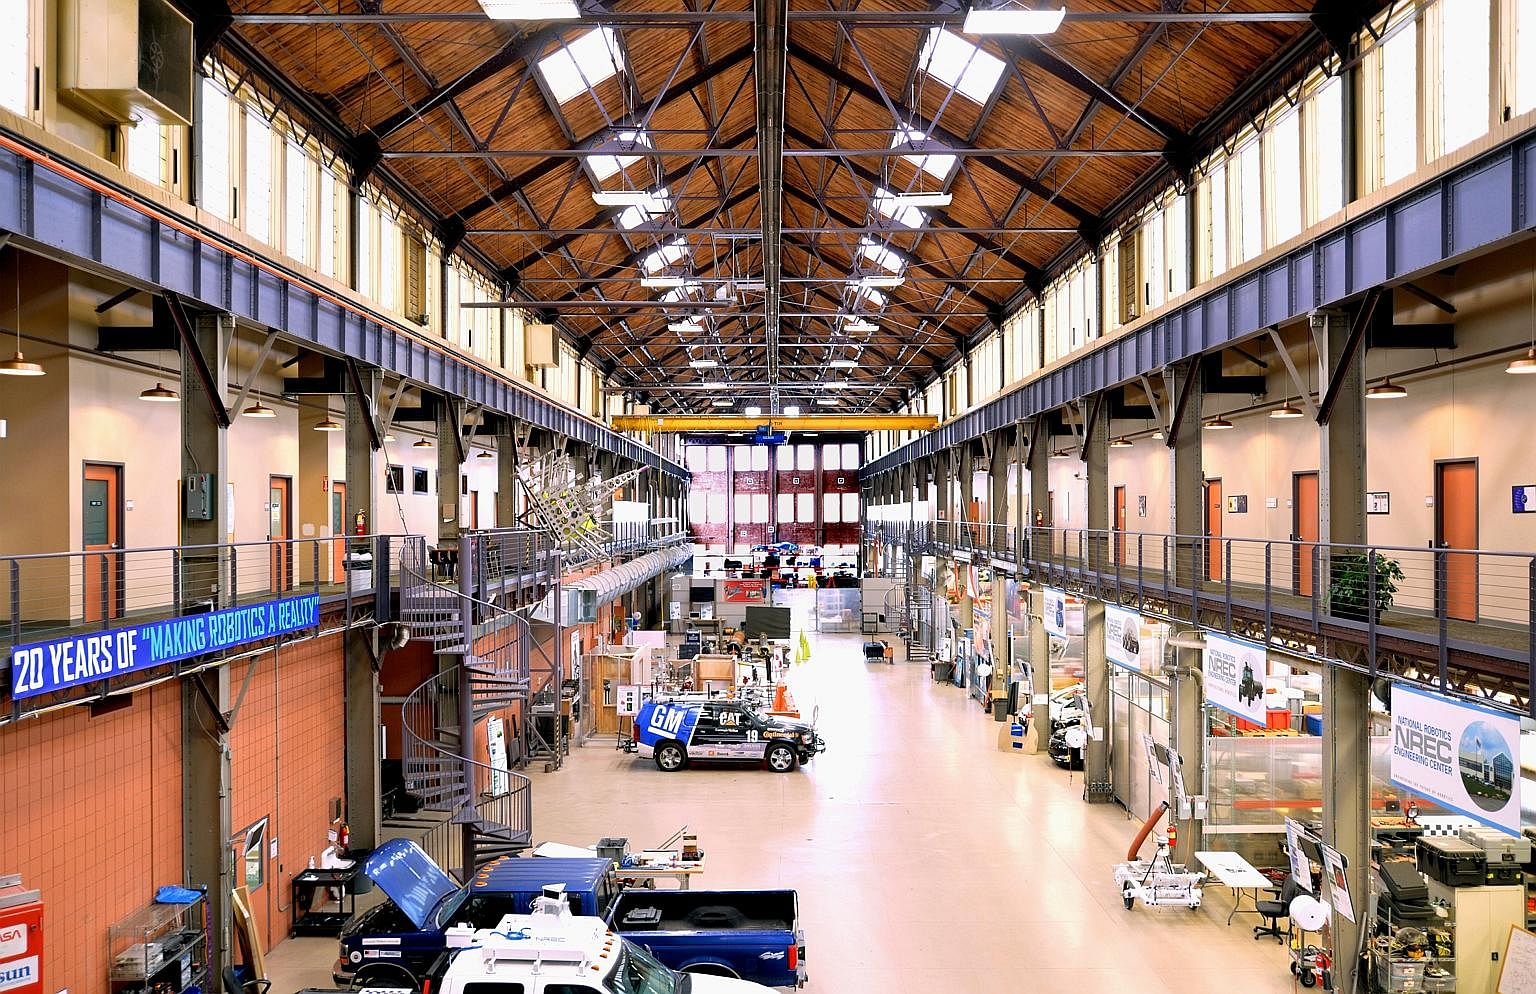 The Carnegie Mellon University's National Robotics Engineering Centre workshop gives an old steel mill new life. CMU's legacy of computer science education is at the heart of the city's tech-job boom.